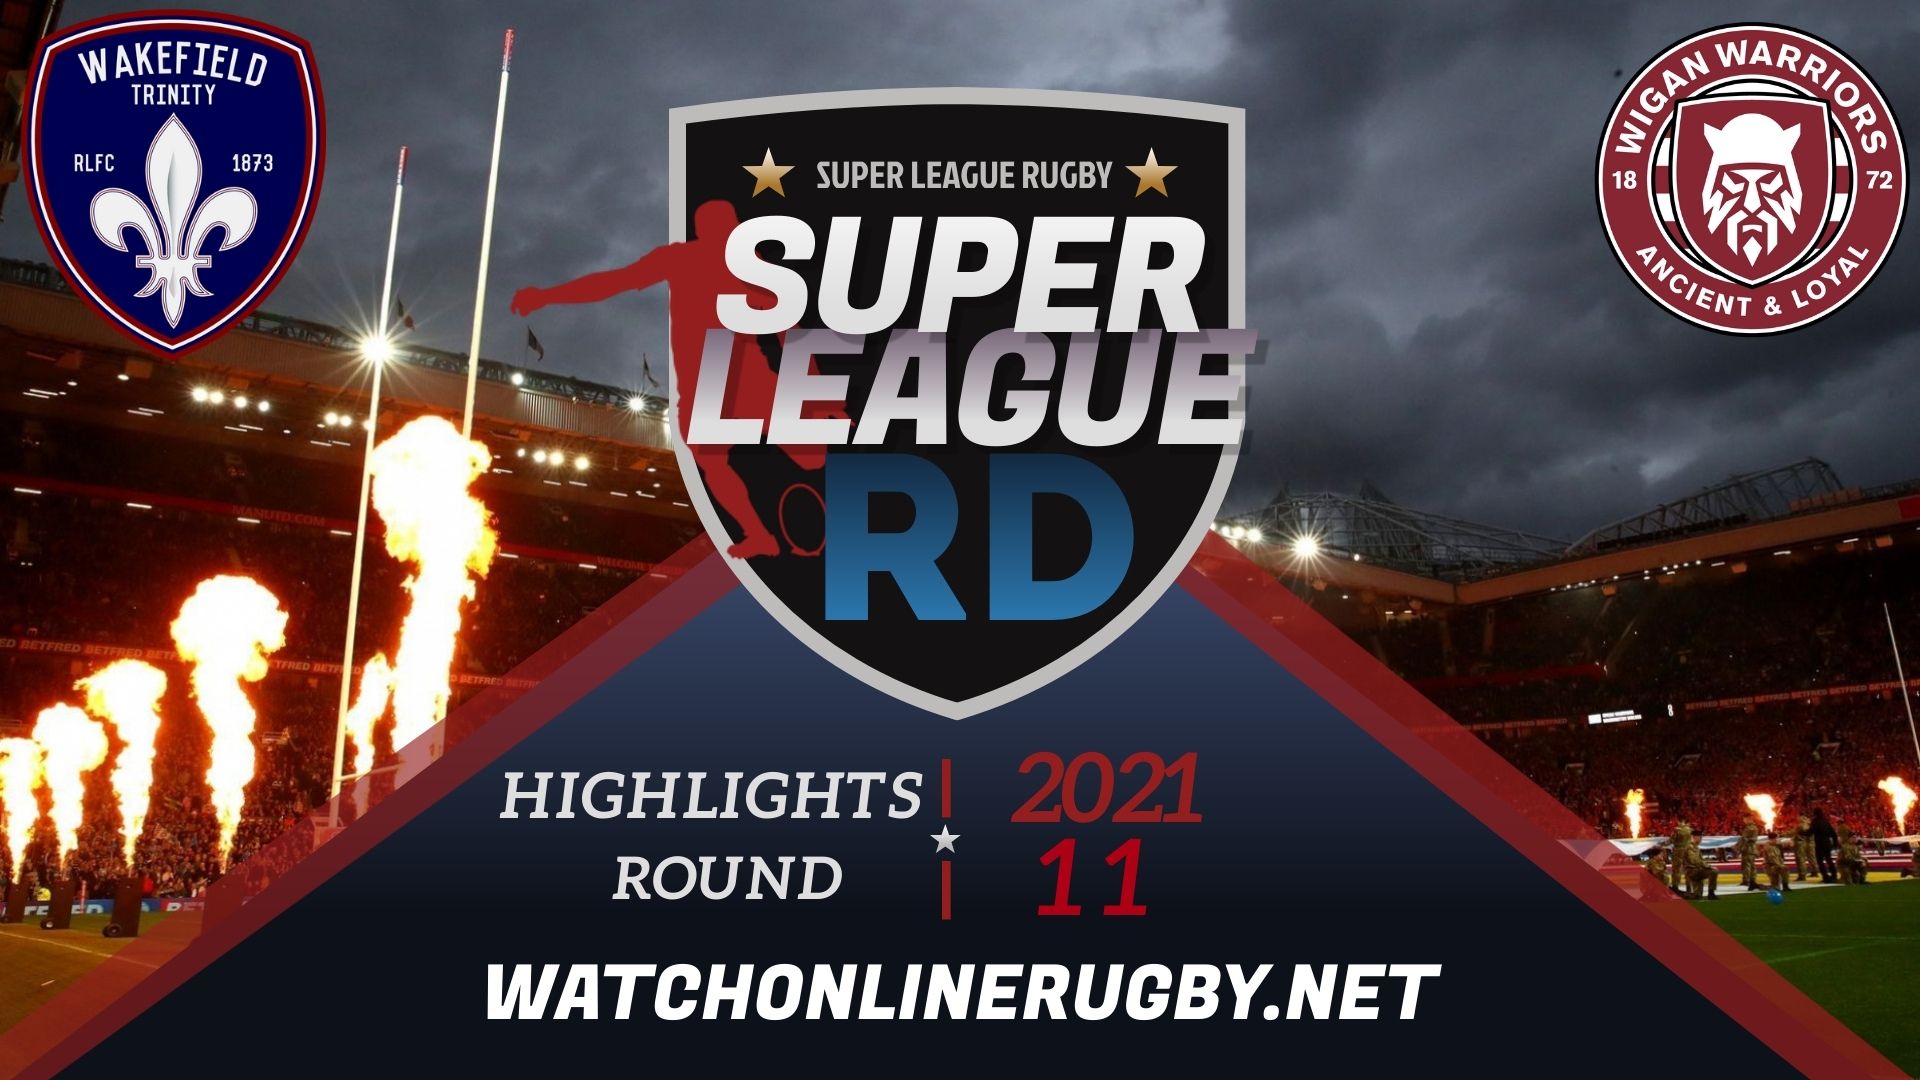 Wakefield Trinity Vs Wigan Warriors Super League Rugby 2021 RD 11